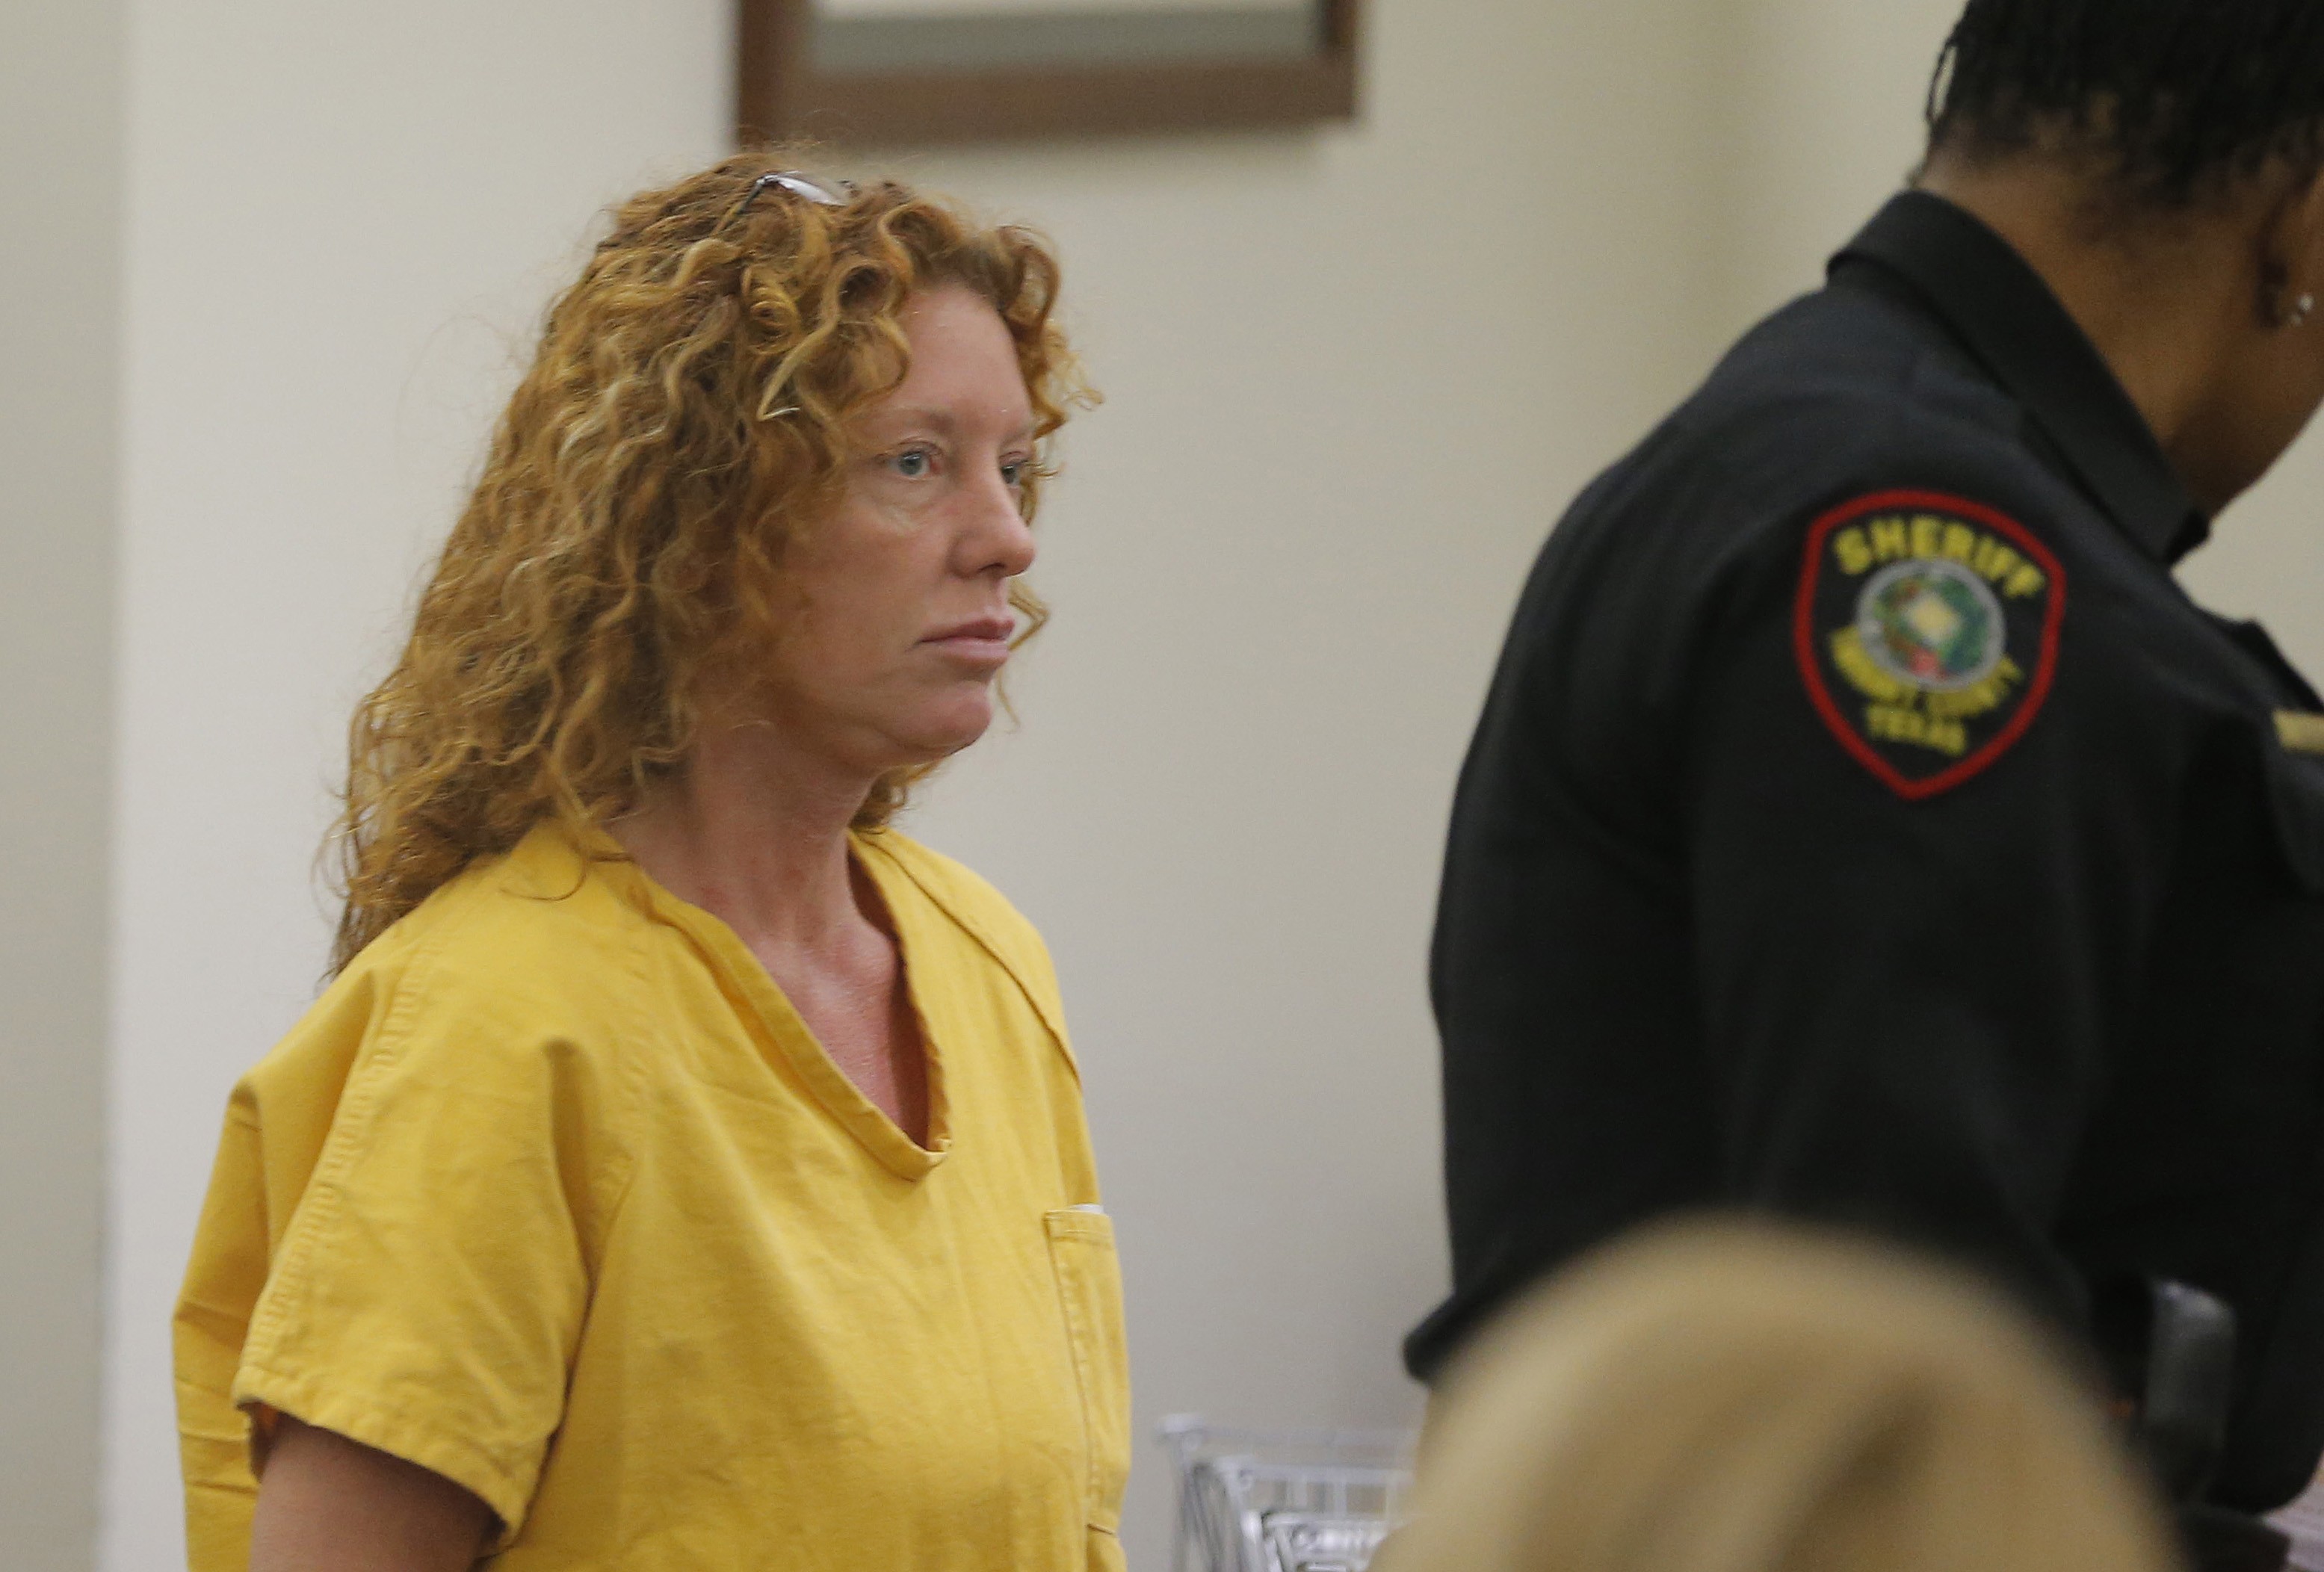  Tonya Couch looks on during a hearing where her son, Ethan Couch, is sentenced to 10 years in prison after fleeing to Mexico to avoid serving his sentence for a drunk driving accident that killed four people.